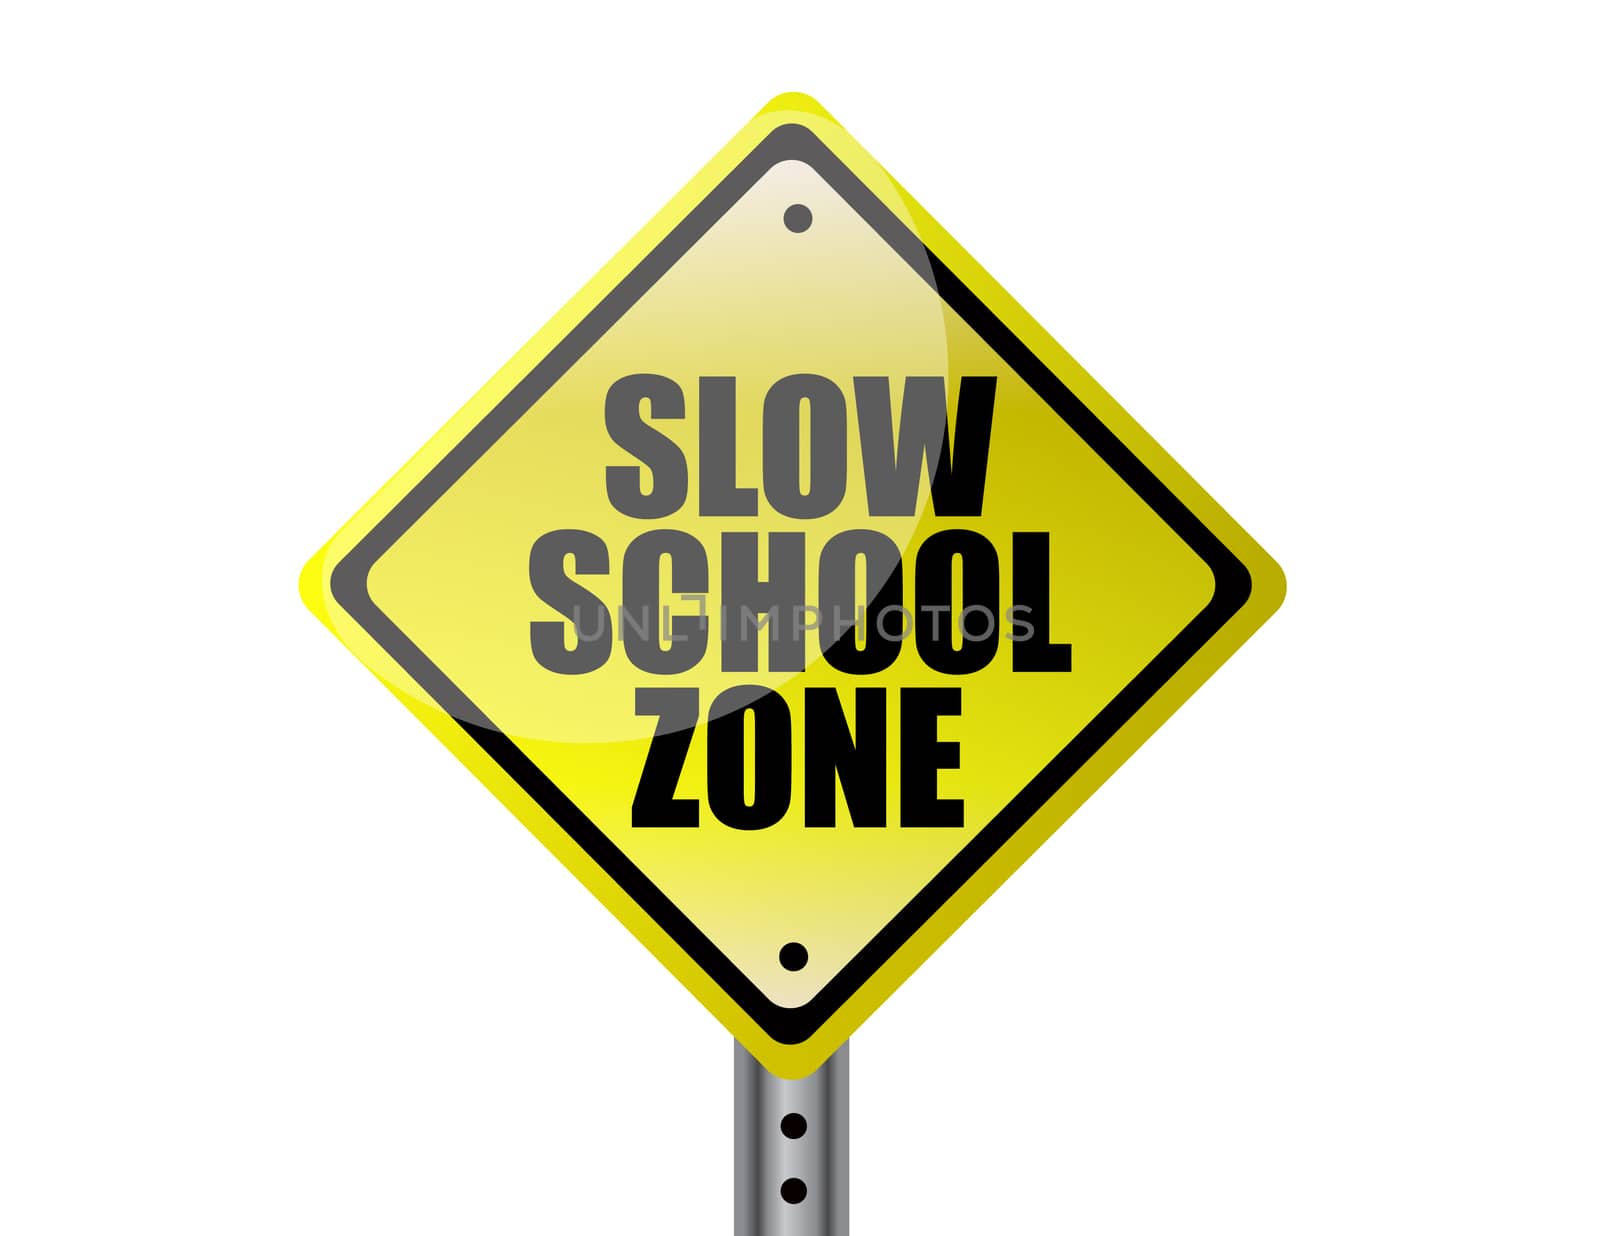 Slow school zone yellow warning street sign over white backgroun by alexmillos